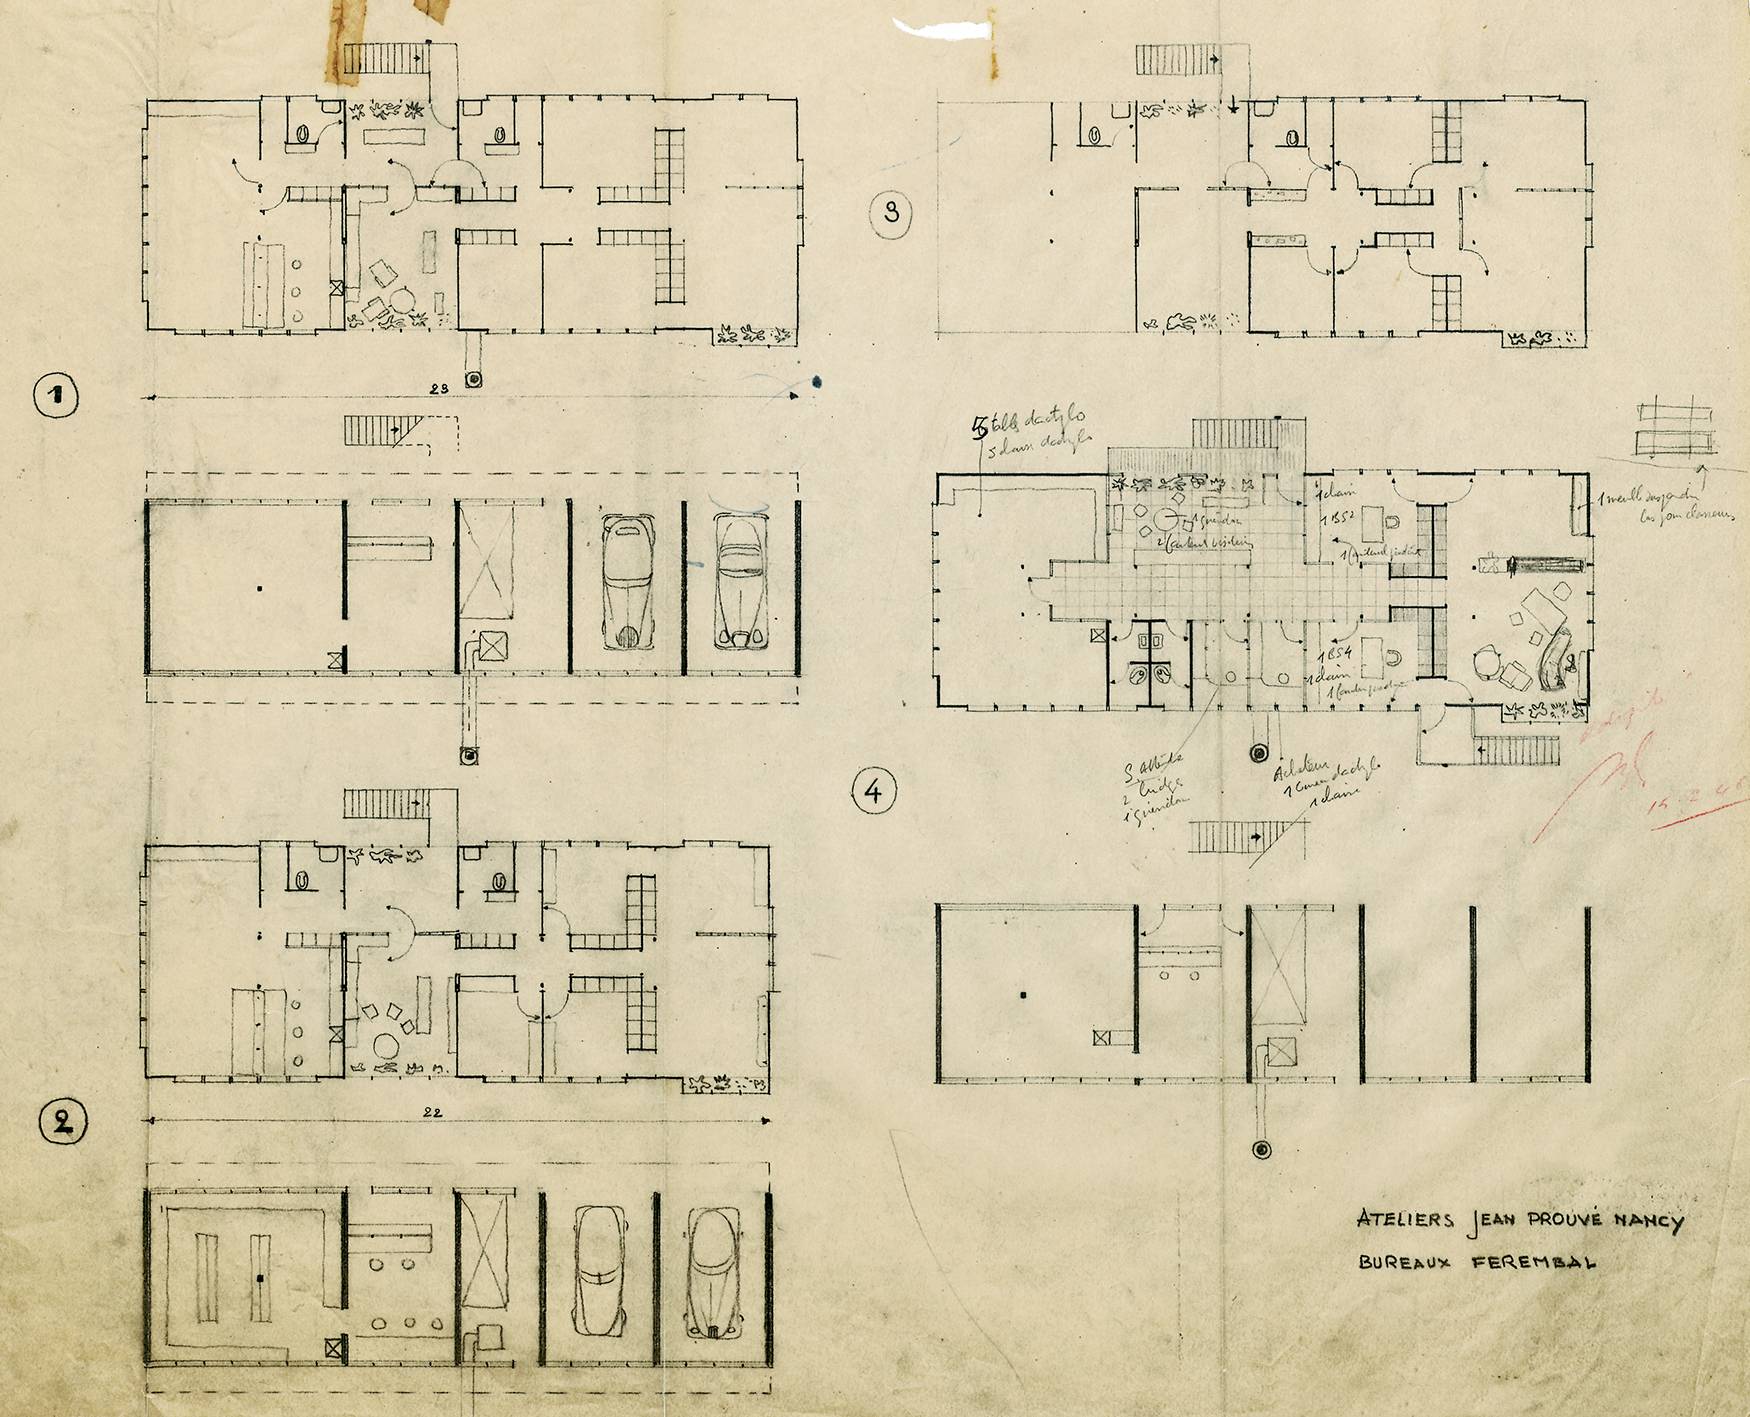 Ateliers Jean Prouvé. “Ferembal Offices”, interior layout project with handwritten directions by Jean Prouvé regarding the furniture. Version approved by Pierre Bindschedler on 14 July 1948.